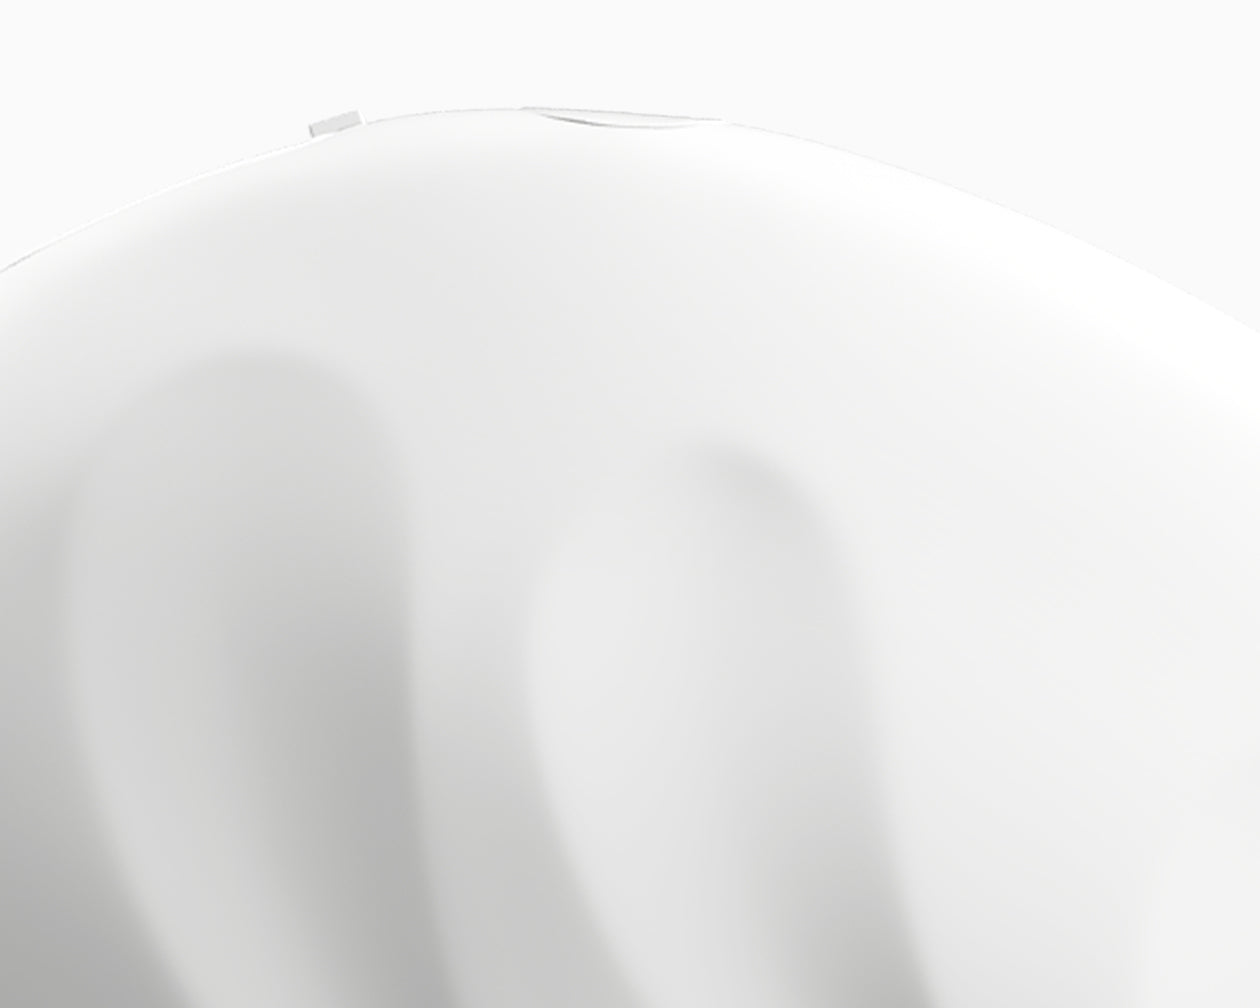 A super close-up image of the top edge of the Redefine beauty device.